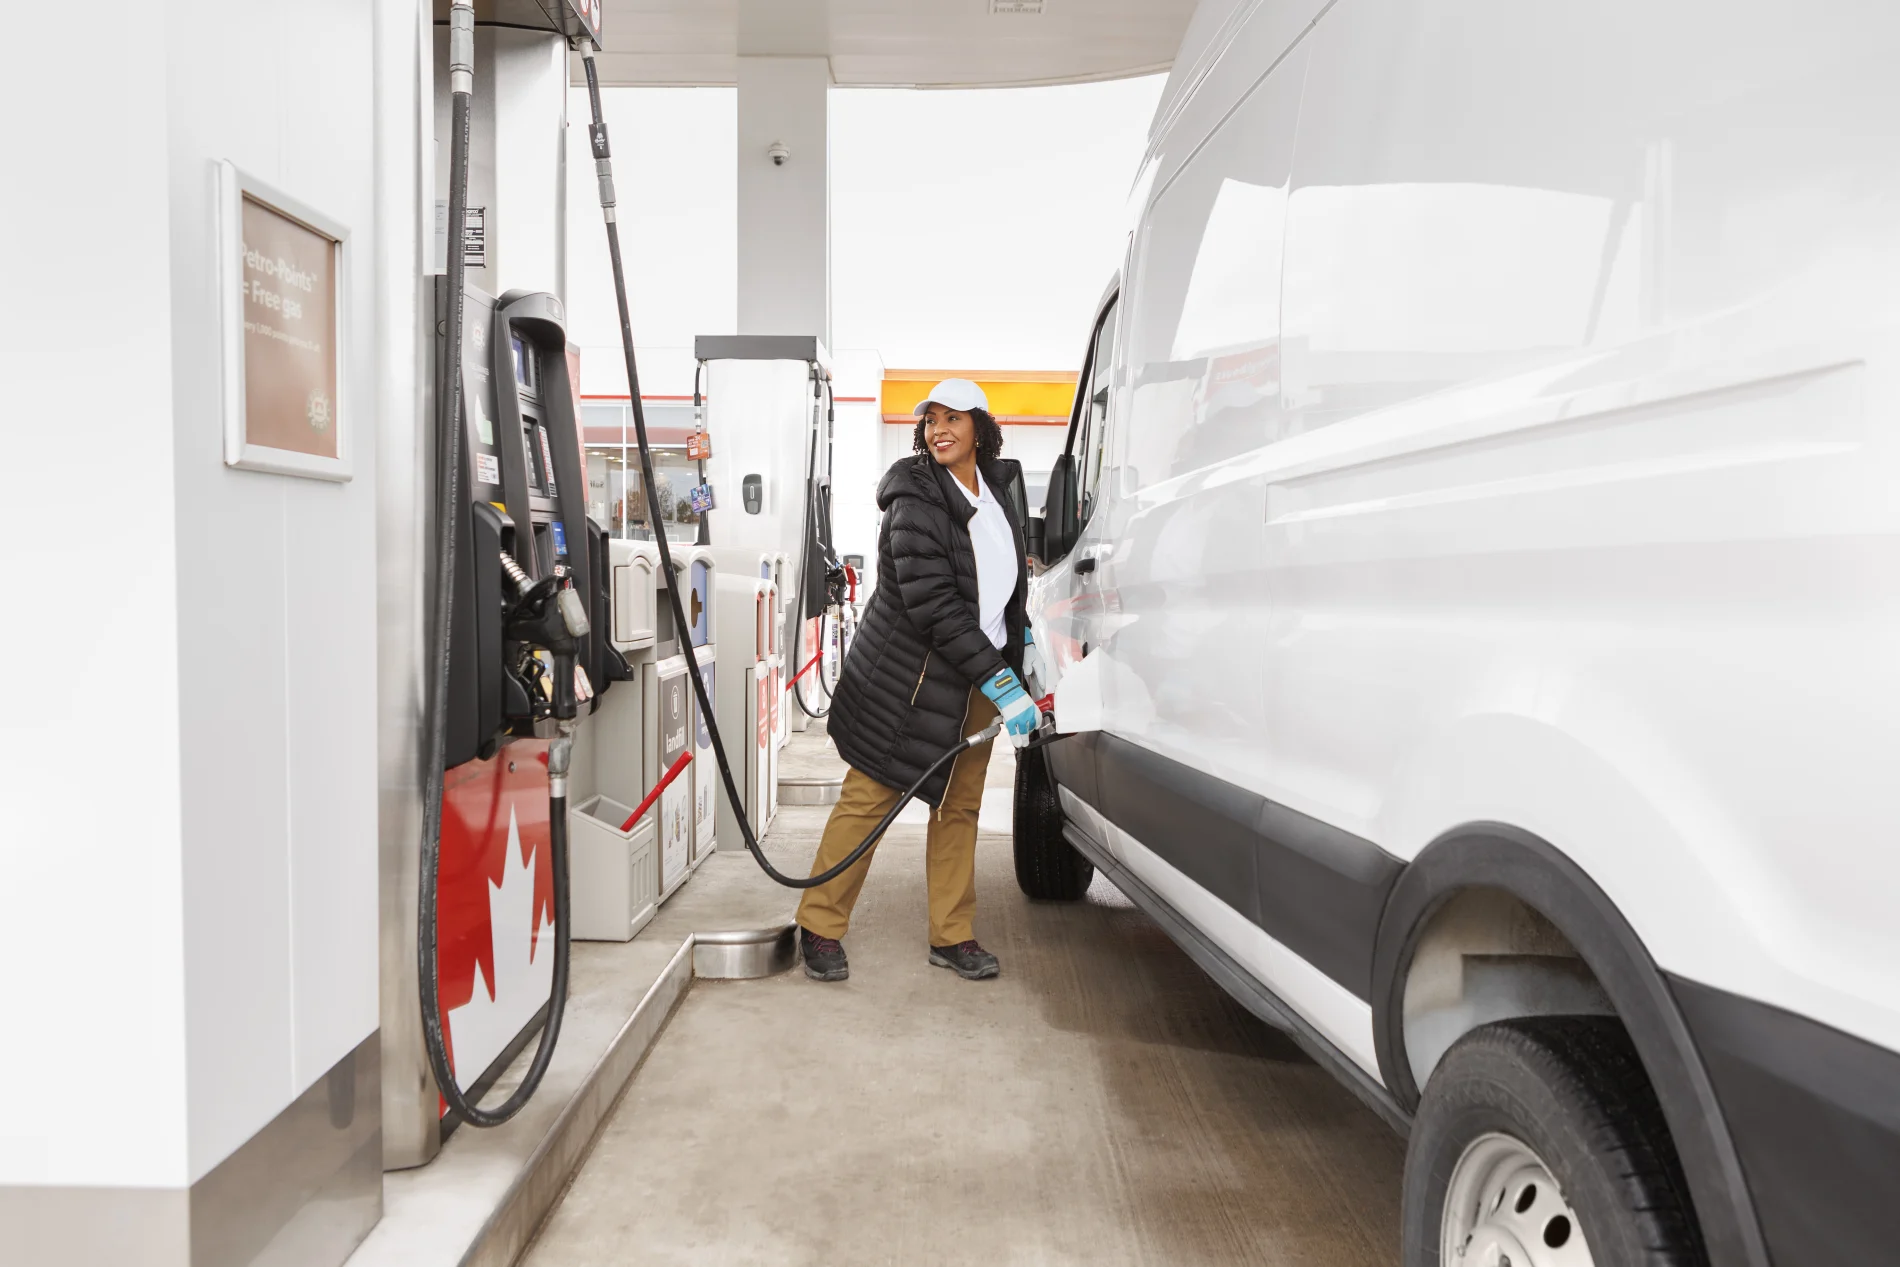 A female driver is refueling her vehicle with gasoline.